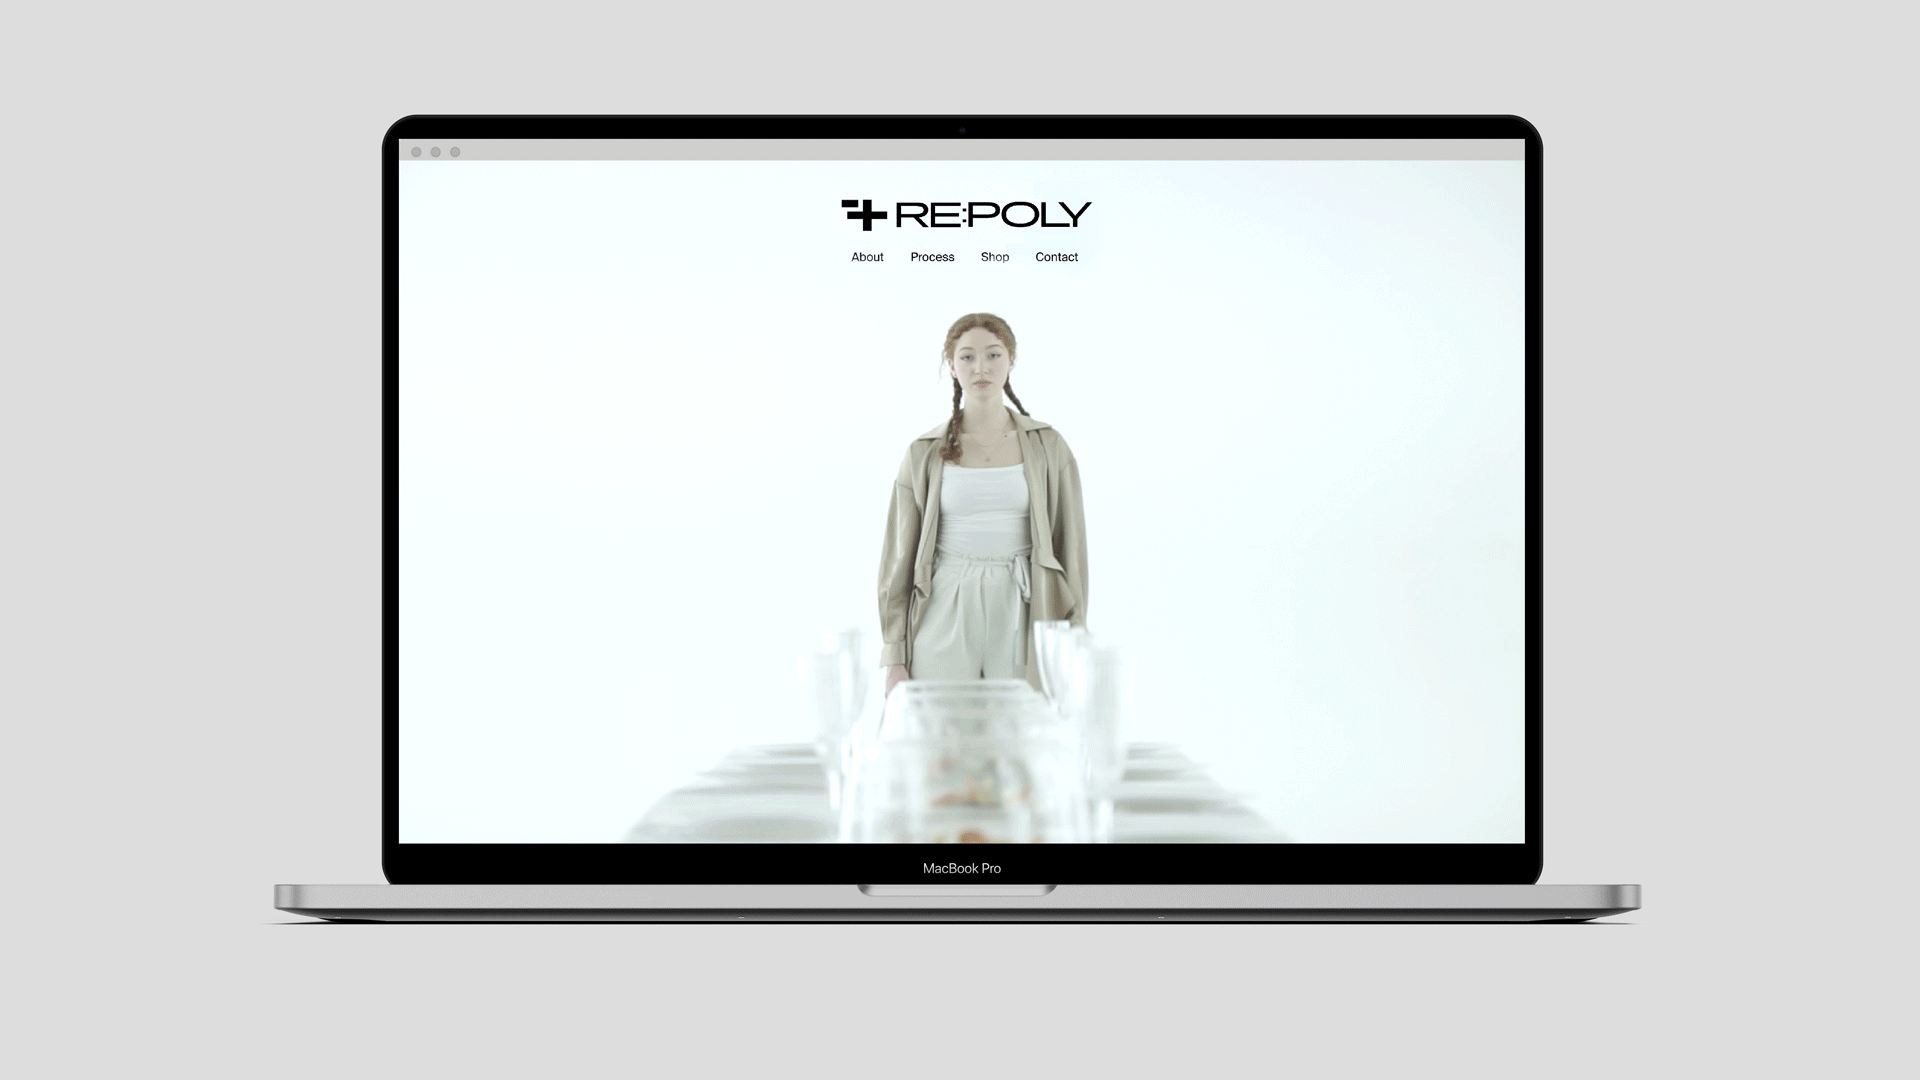 A display of both web and mobile interface design for RE:POLY.